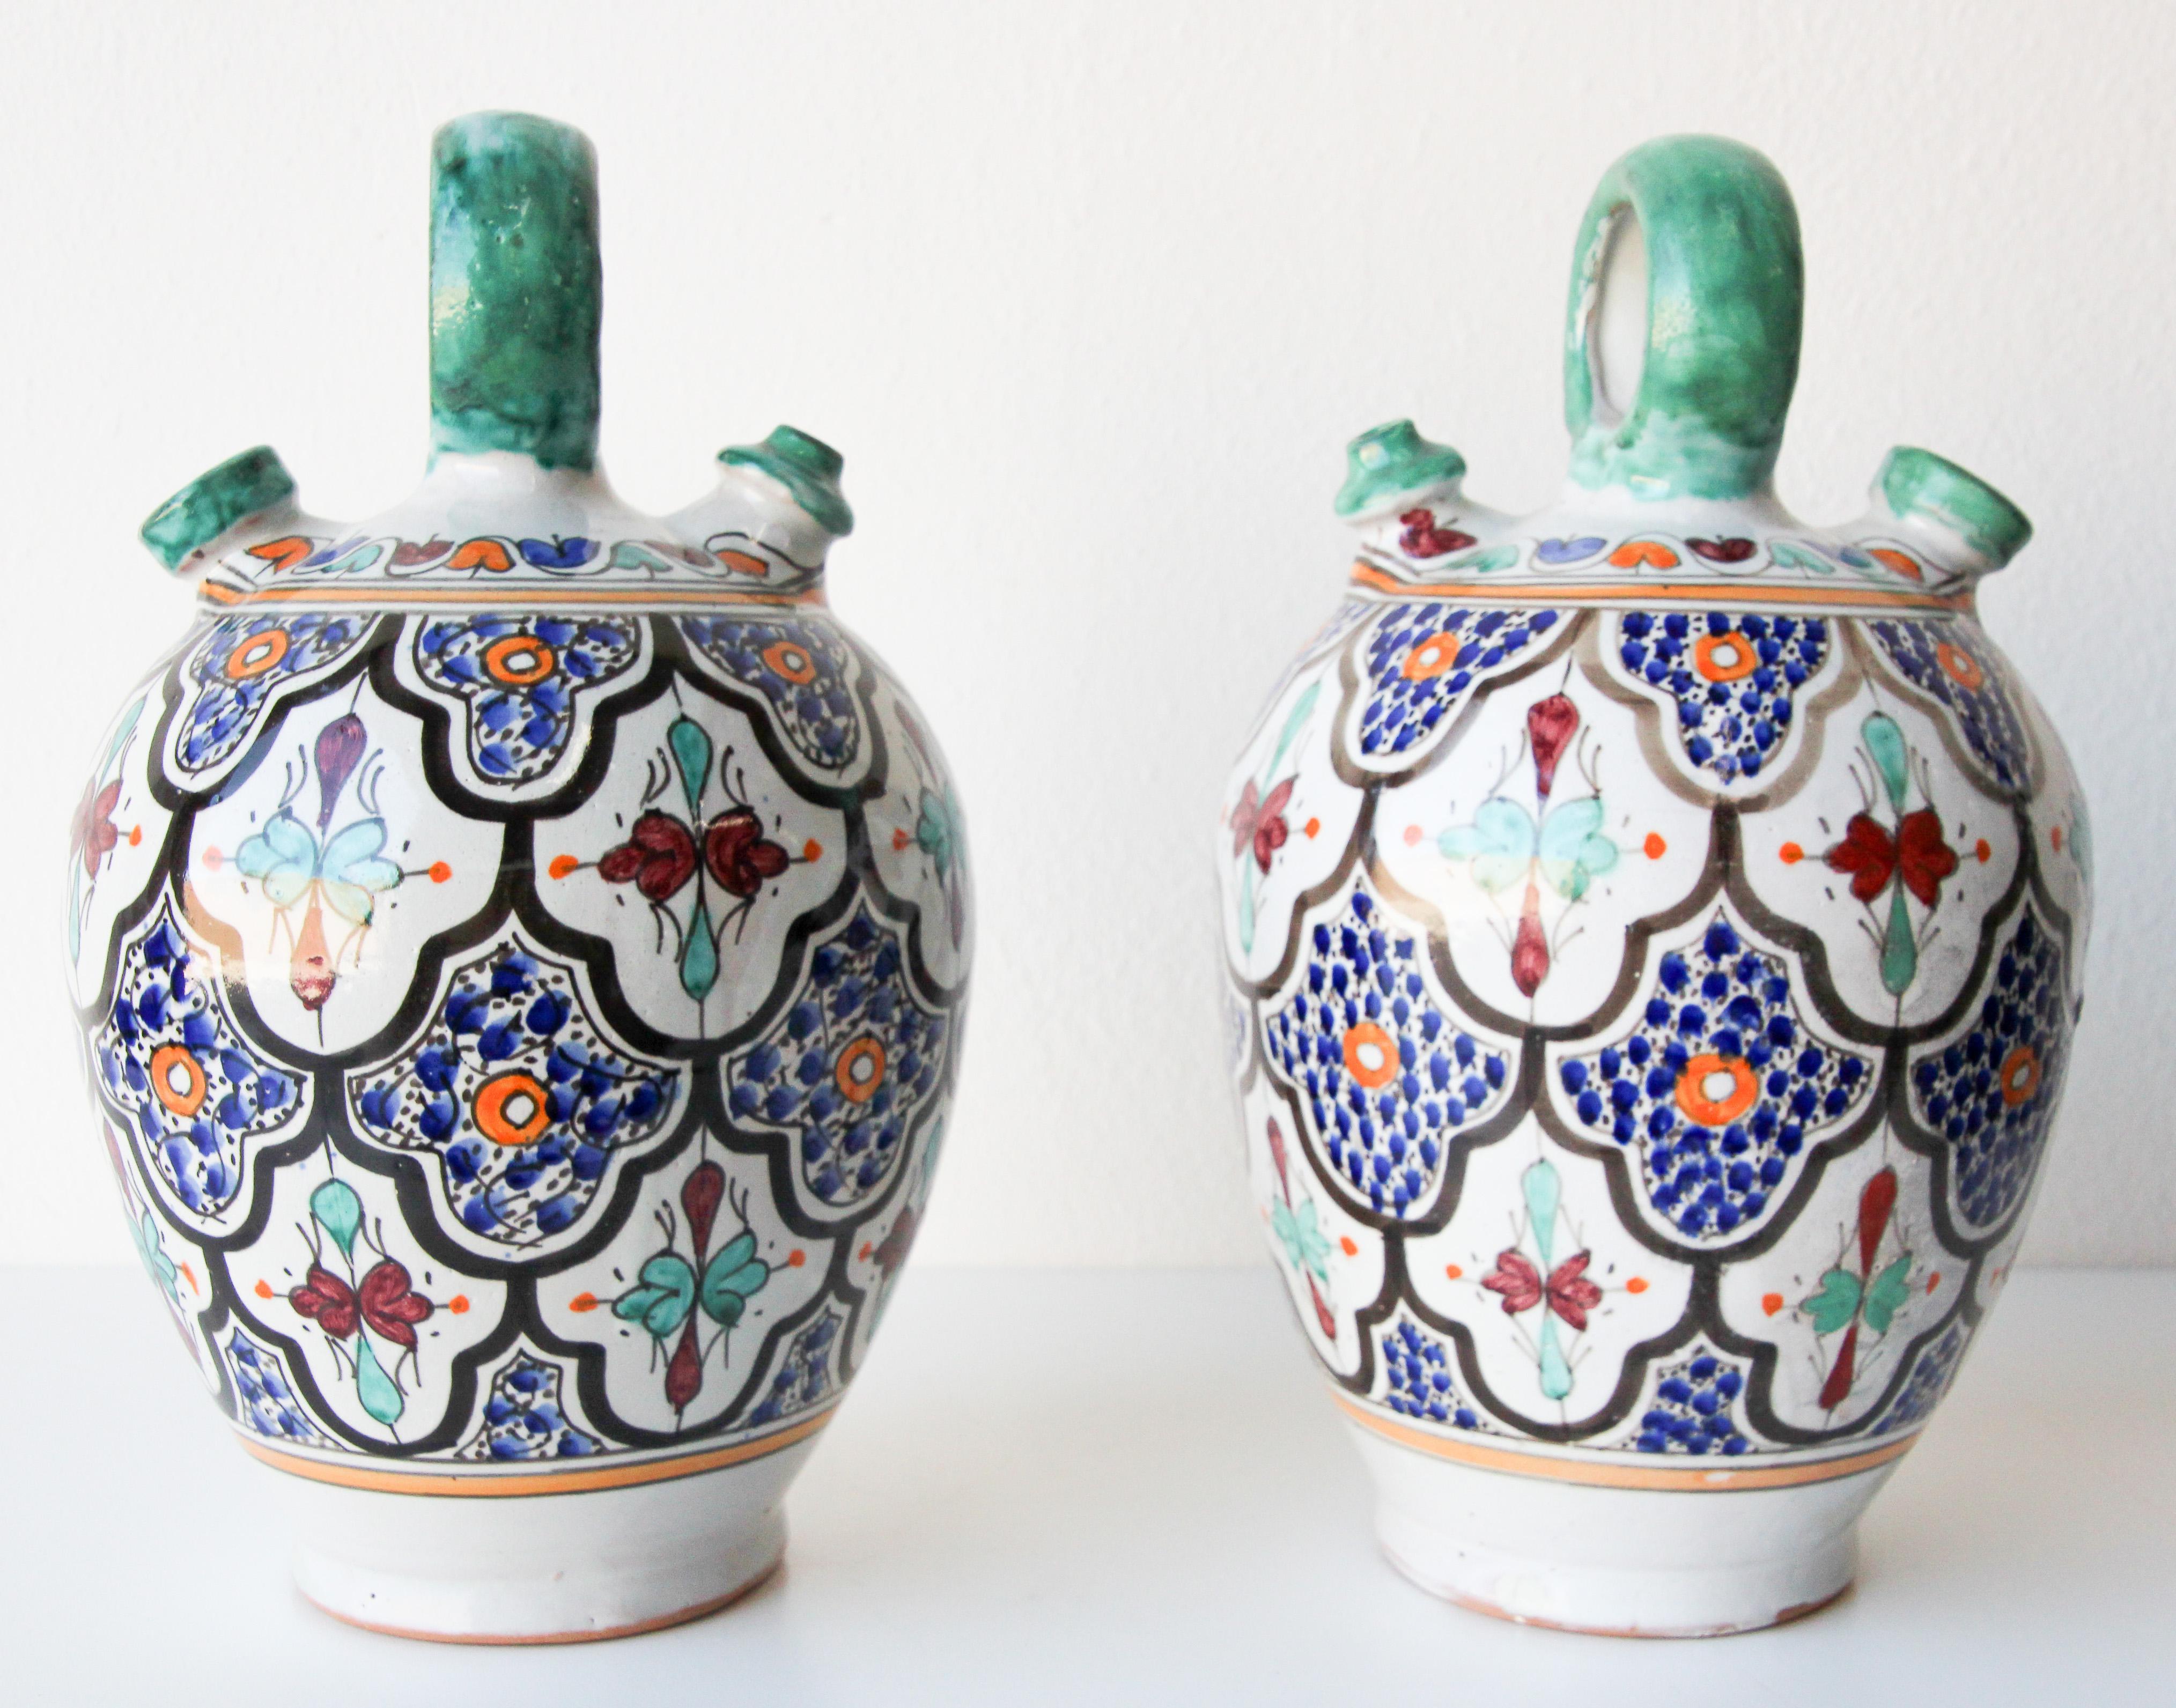 Large pair of Moroccan glazed polychrome ceramic water jug with handle.
Hand painted ceramic handcrafted by skilled Moroccan artisans in Fez Morocco.
Moorish designs in turquoise, cobalt blue, teal, saffron yellow, prune and ivory colors.
Size: